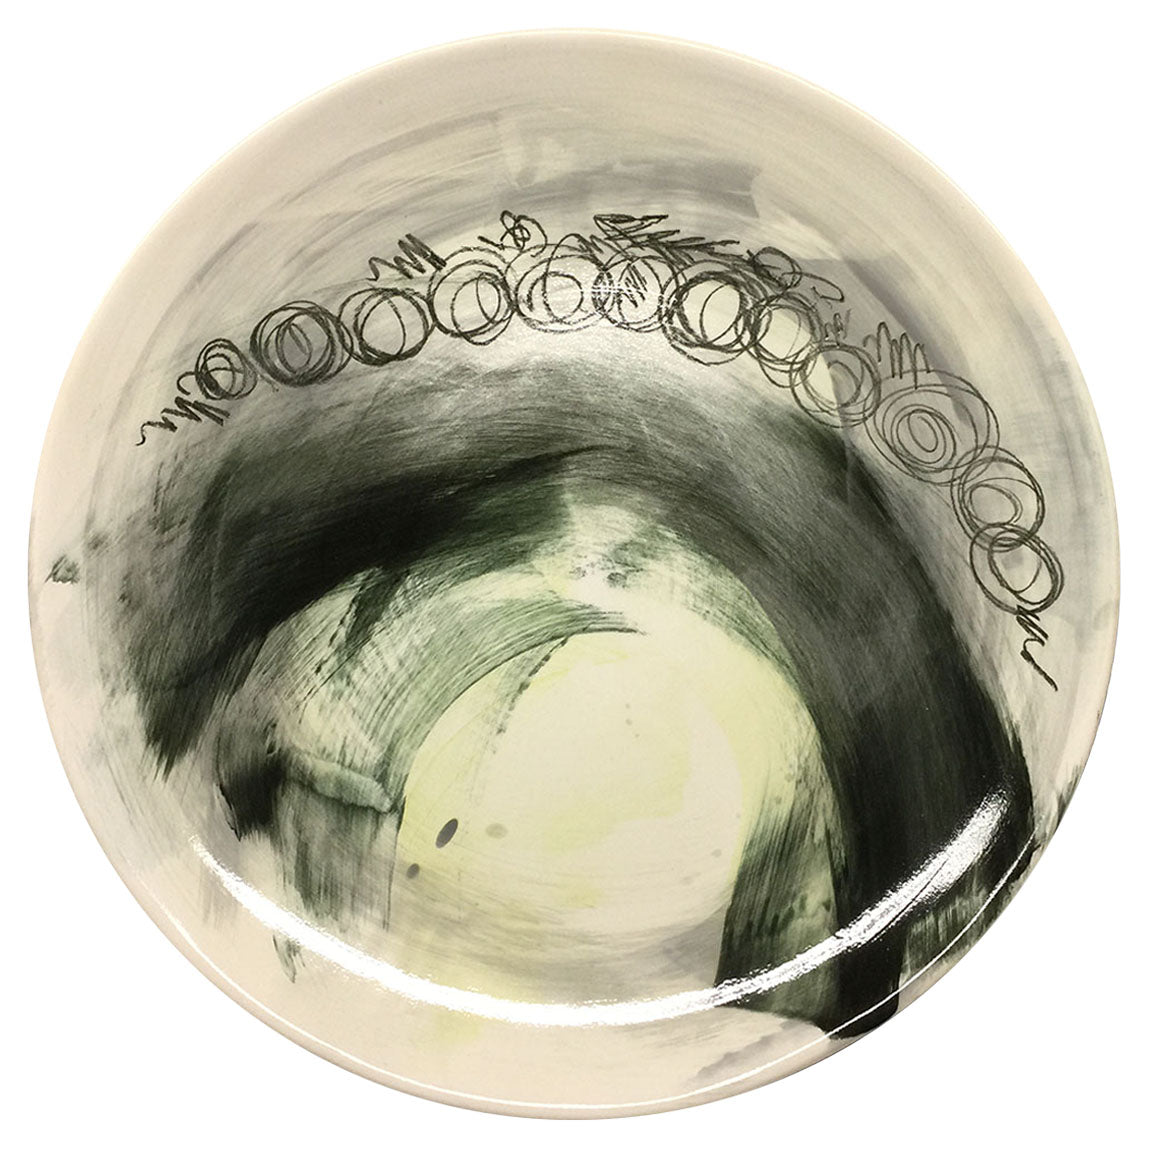 PLATTER #23 - BLACK, GREY, BLUE & CHARTREUSE - HAND-PAINTED EARTHENWARE